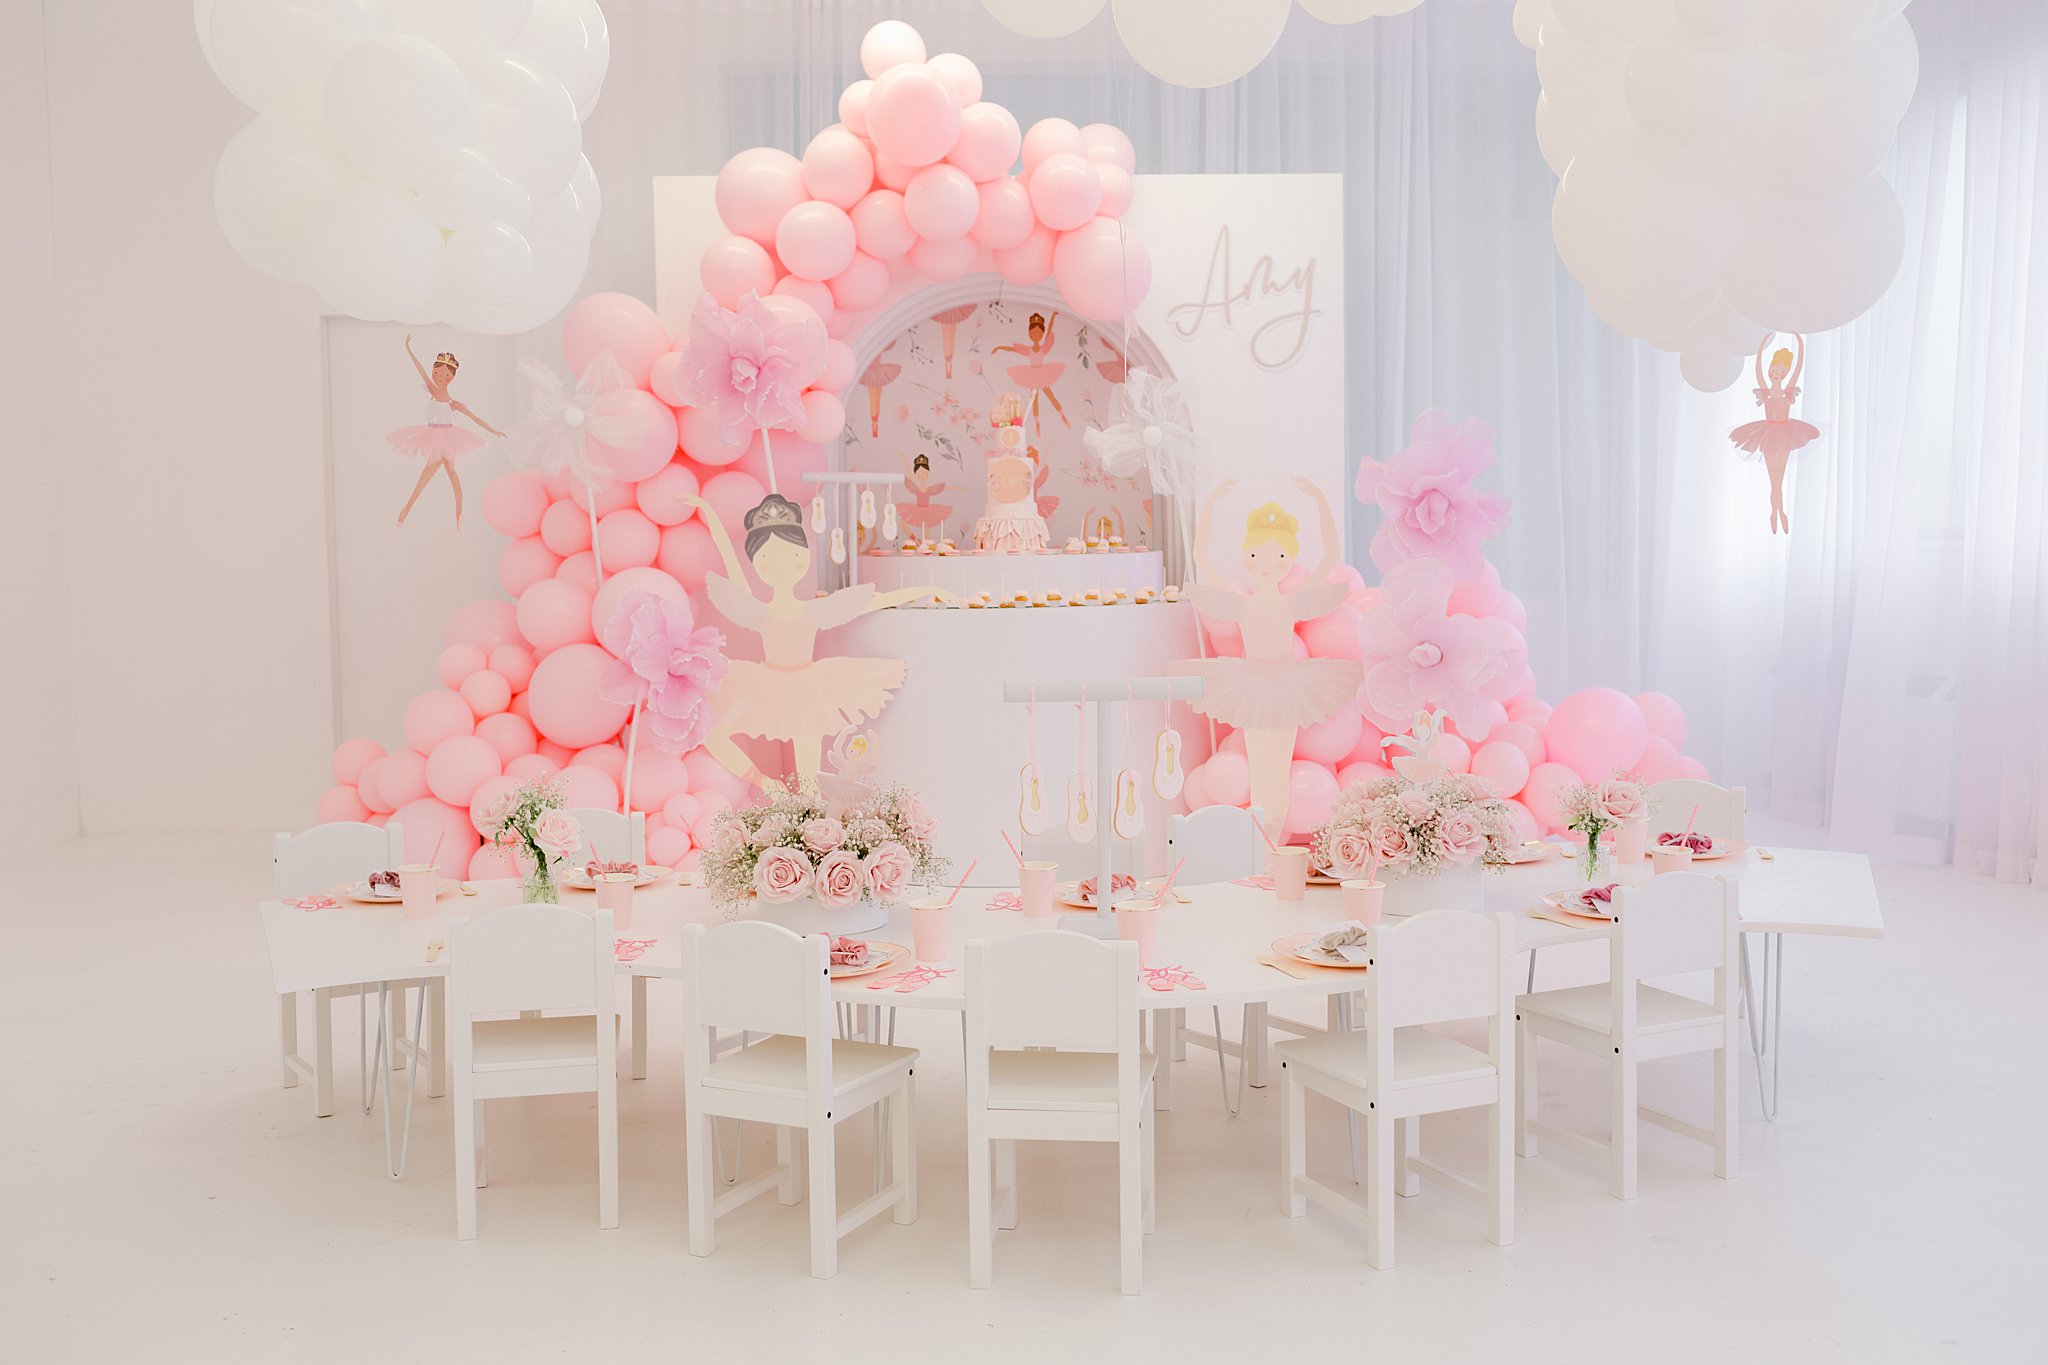 Capturing the charm of a Montreal birthday bash with pink tutus and ballerina themes